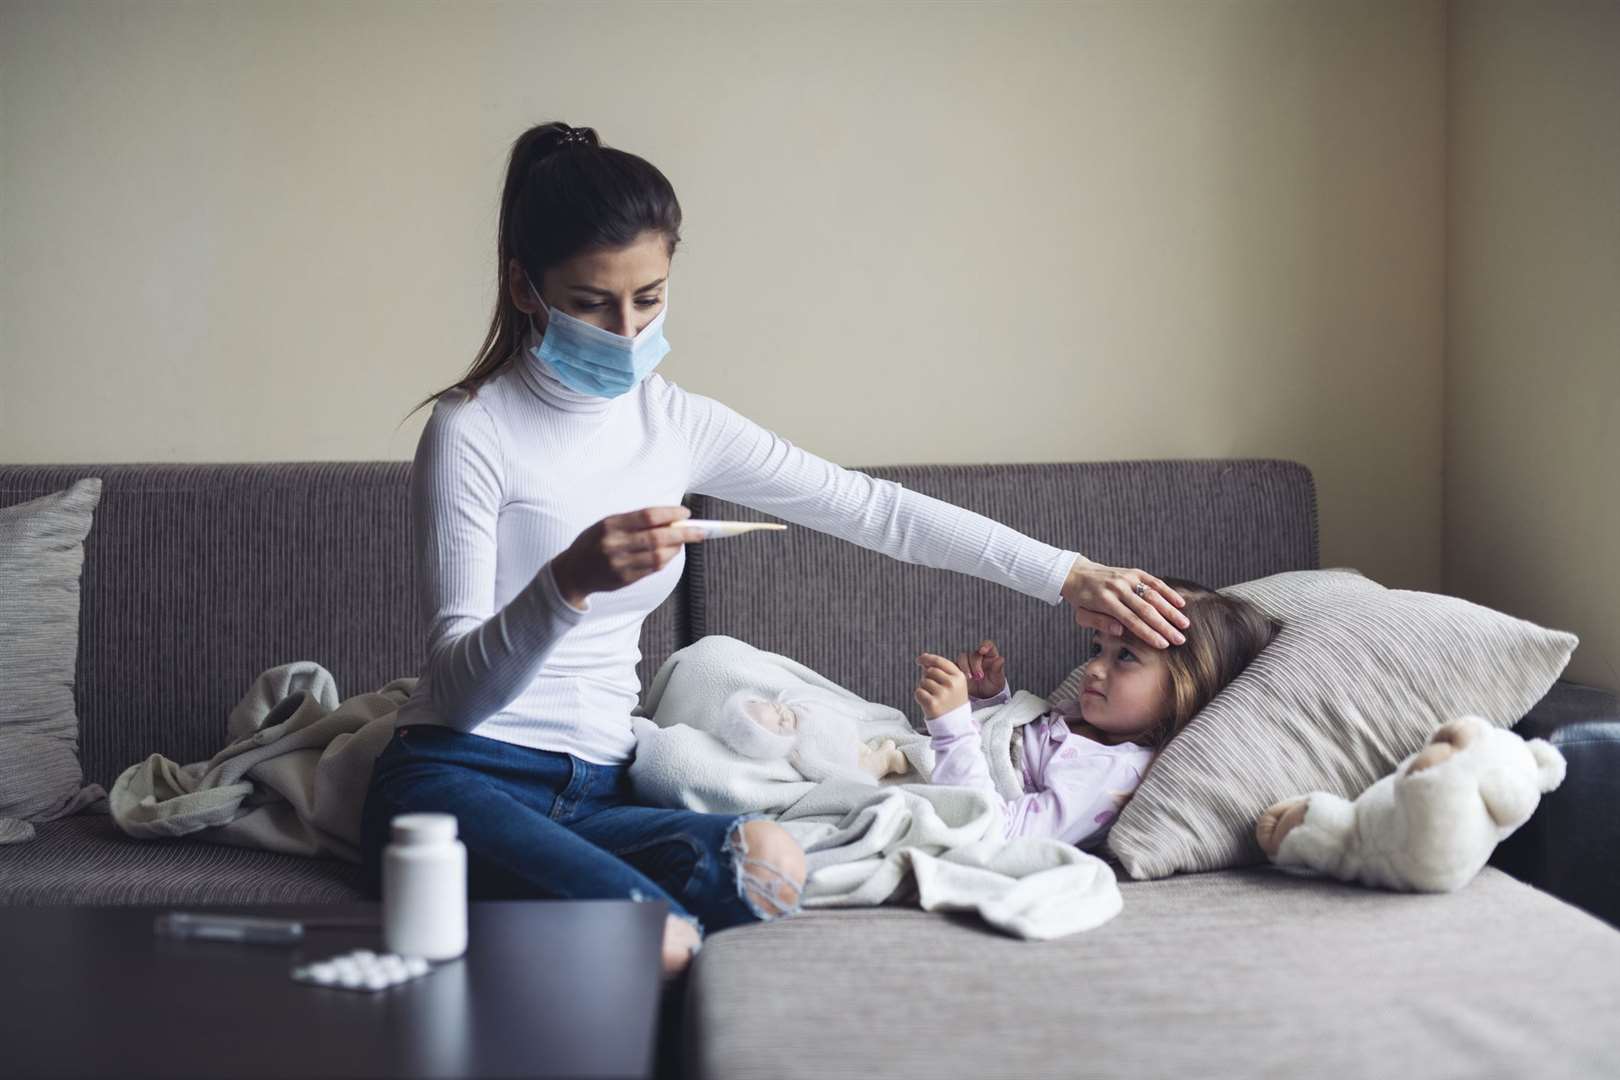 Health officials are becoming concerned about the high numbers of children sick with flu. Image: Stock photo.